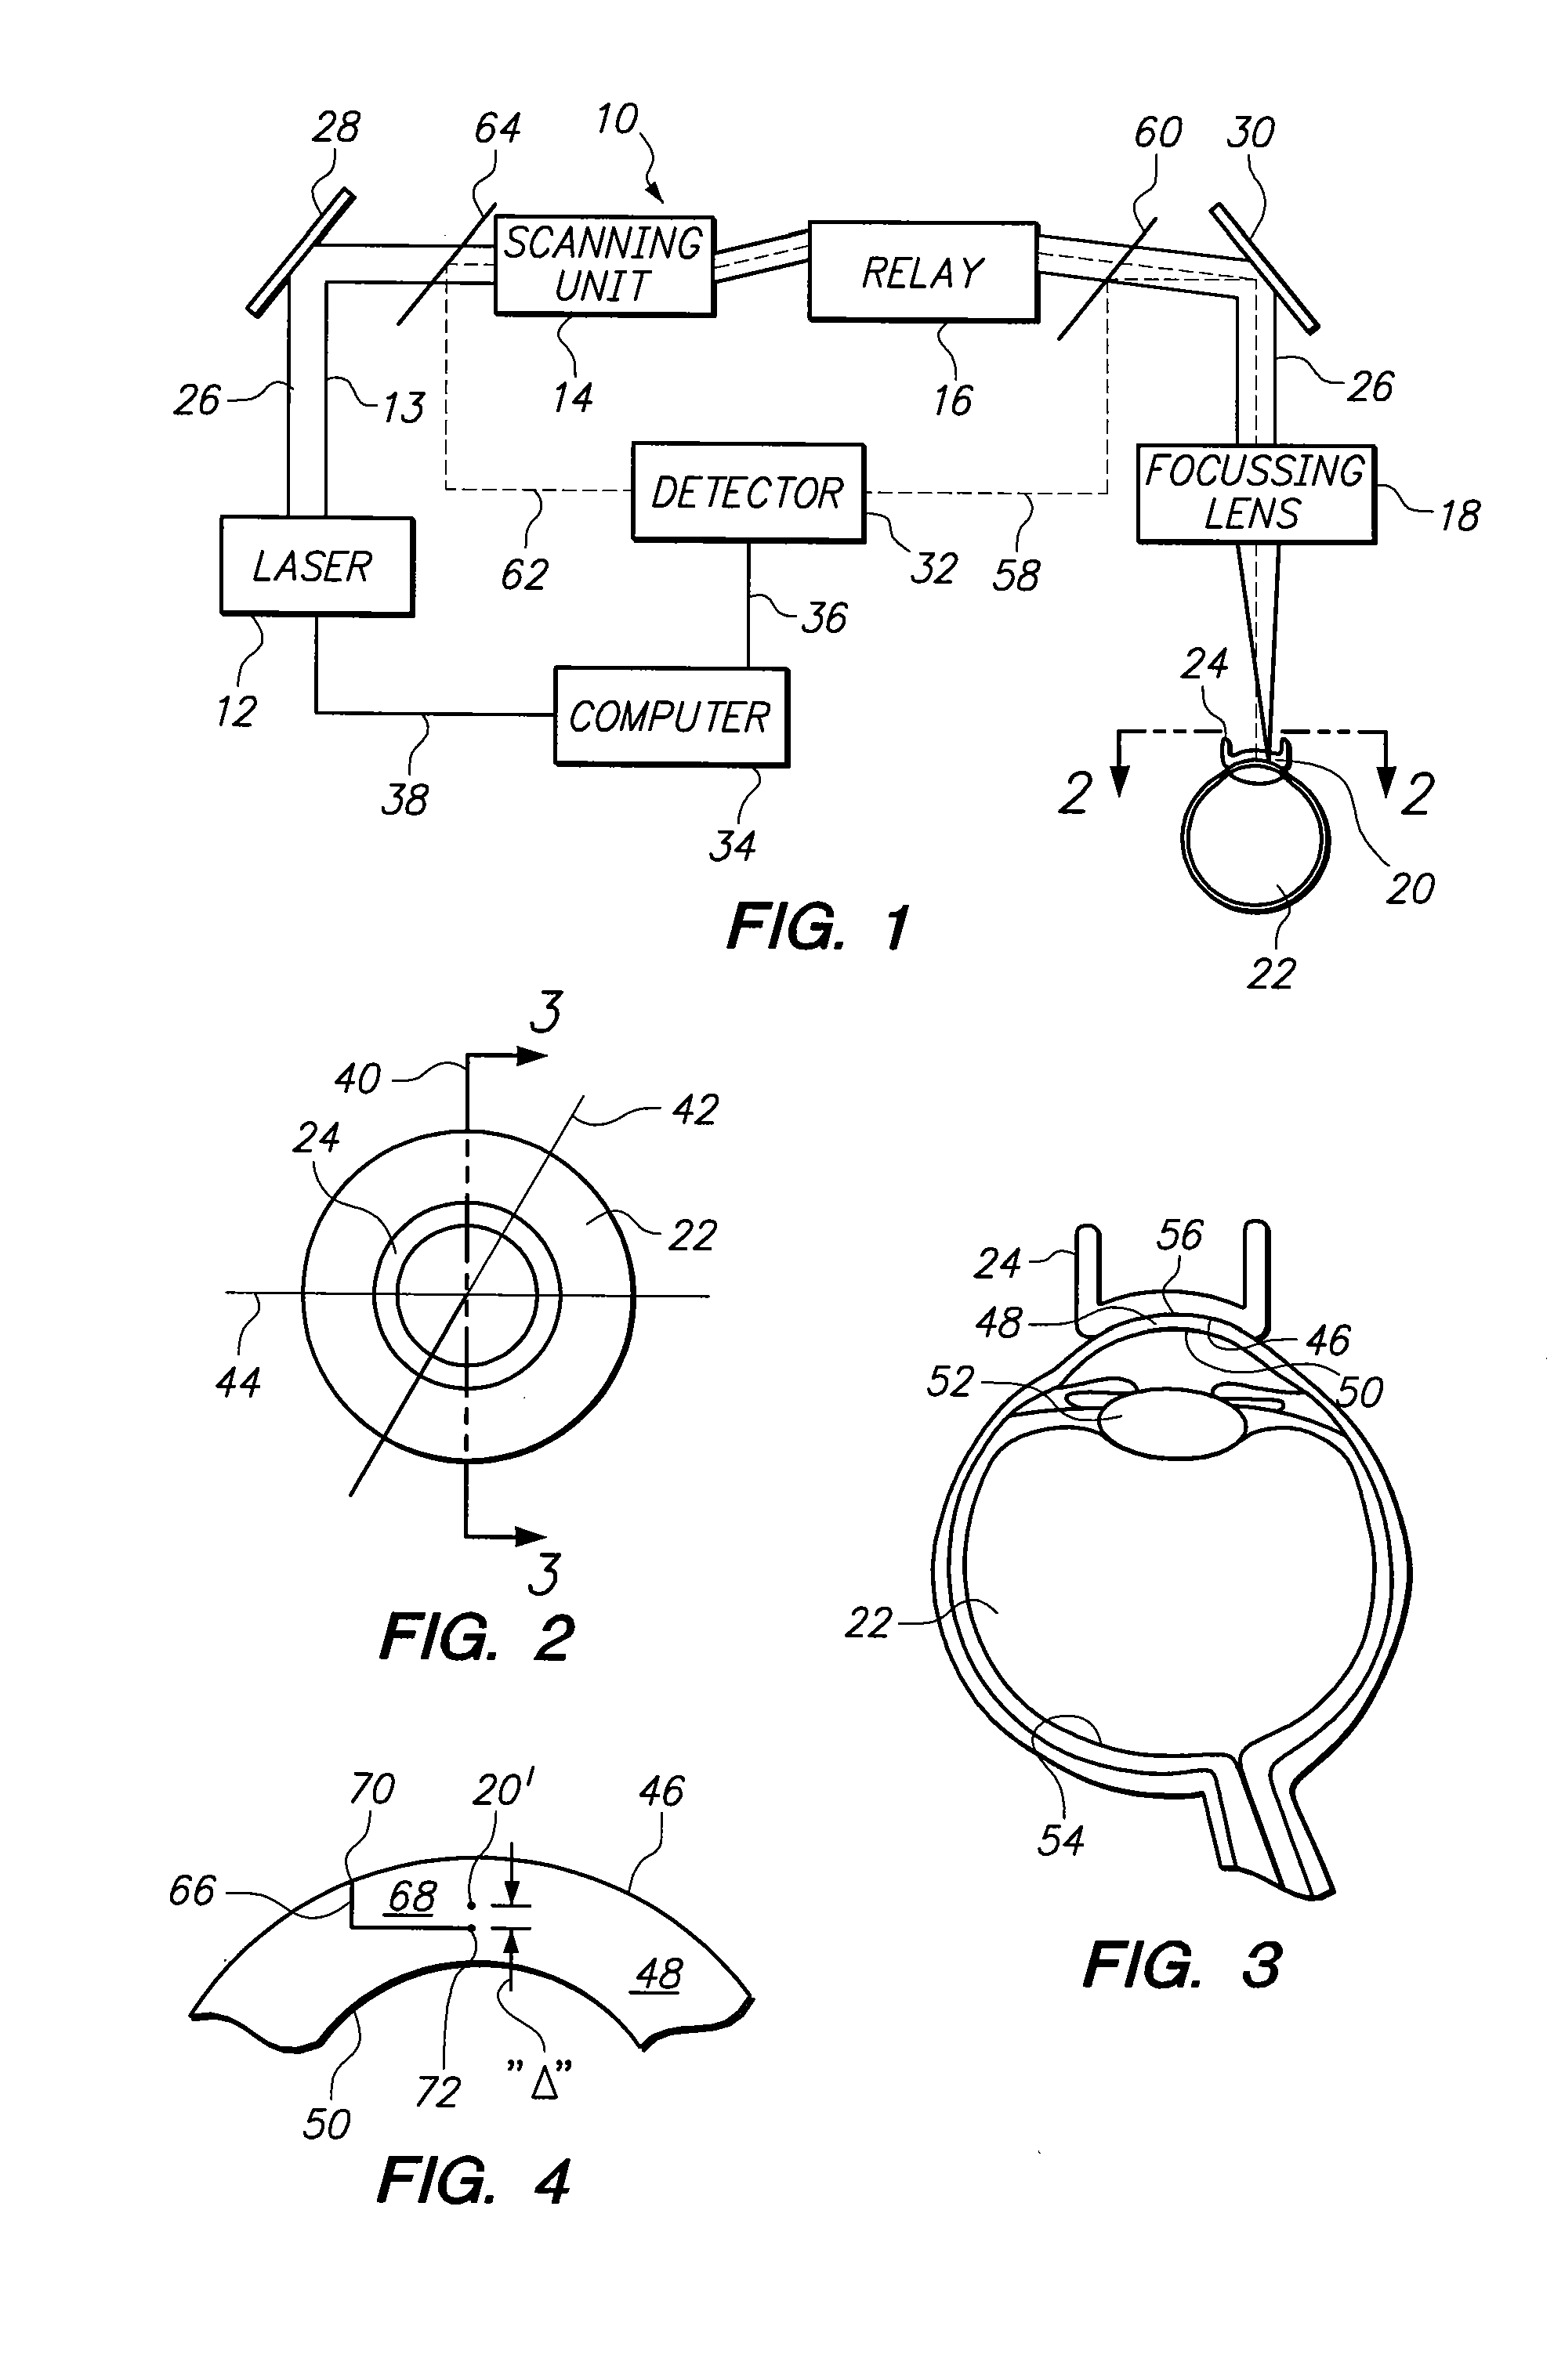 System and method for precise beam positioning in ocular surgery